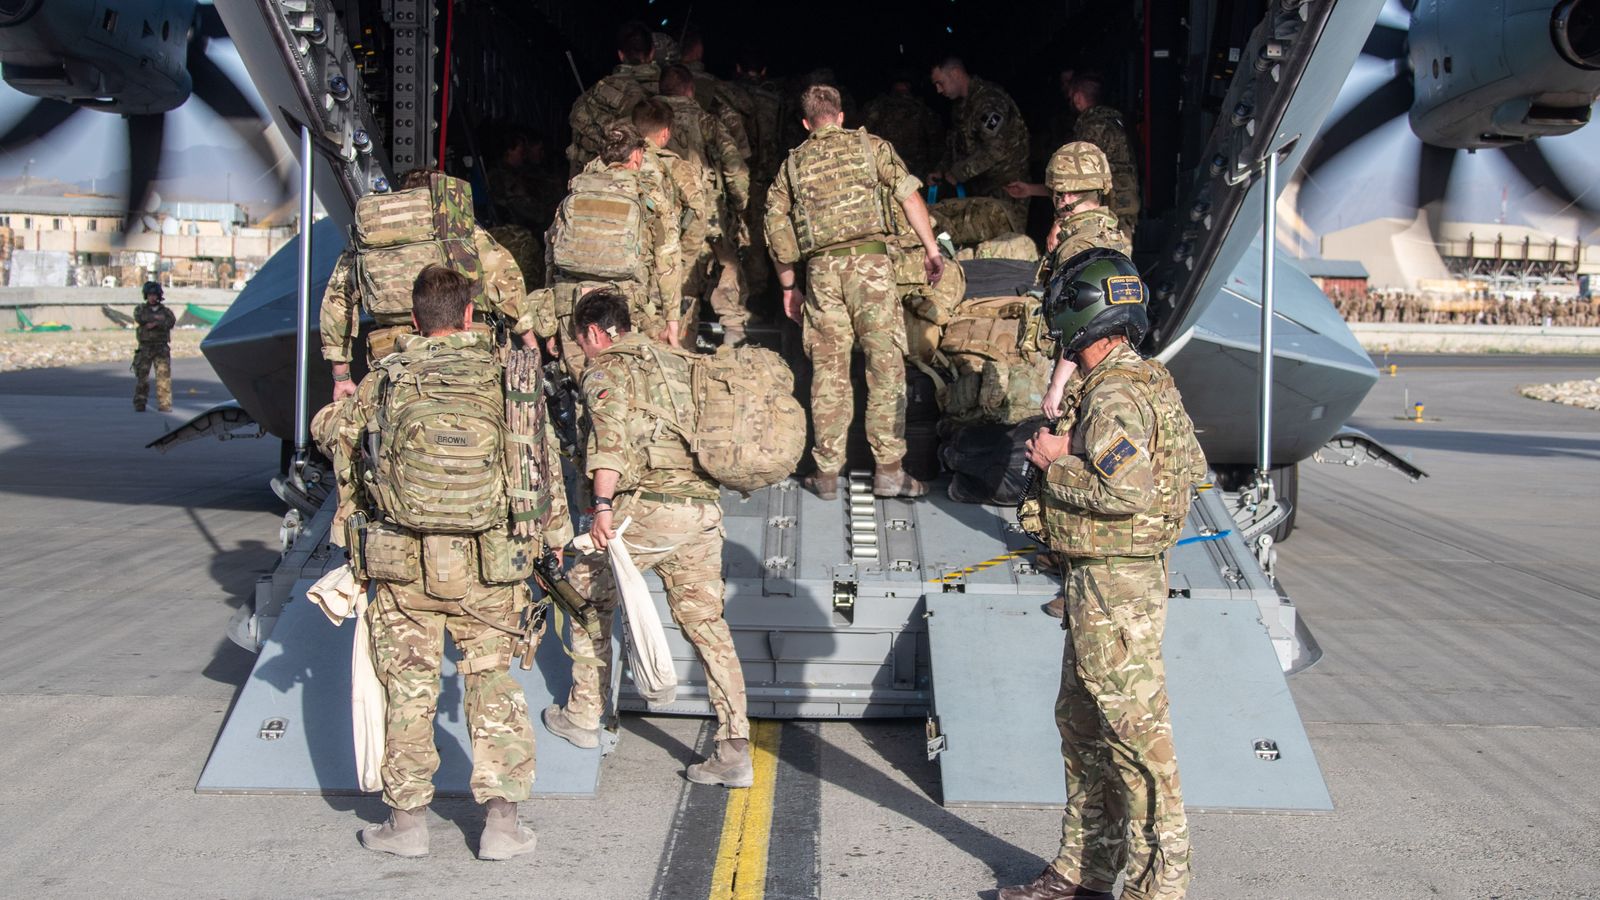 Afghanistan: Last UK troops leave Kabul on final military flight – bringing Britain’s 20-year campaign to an end